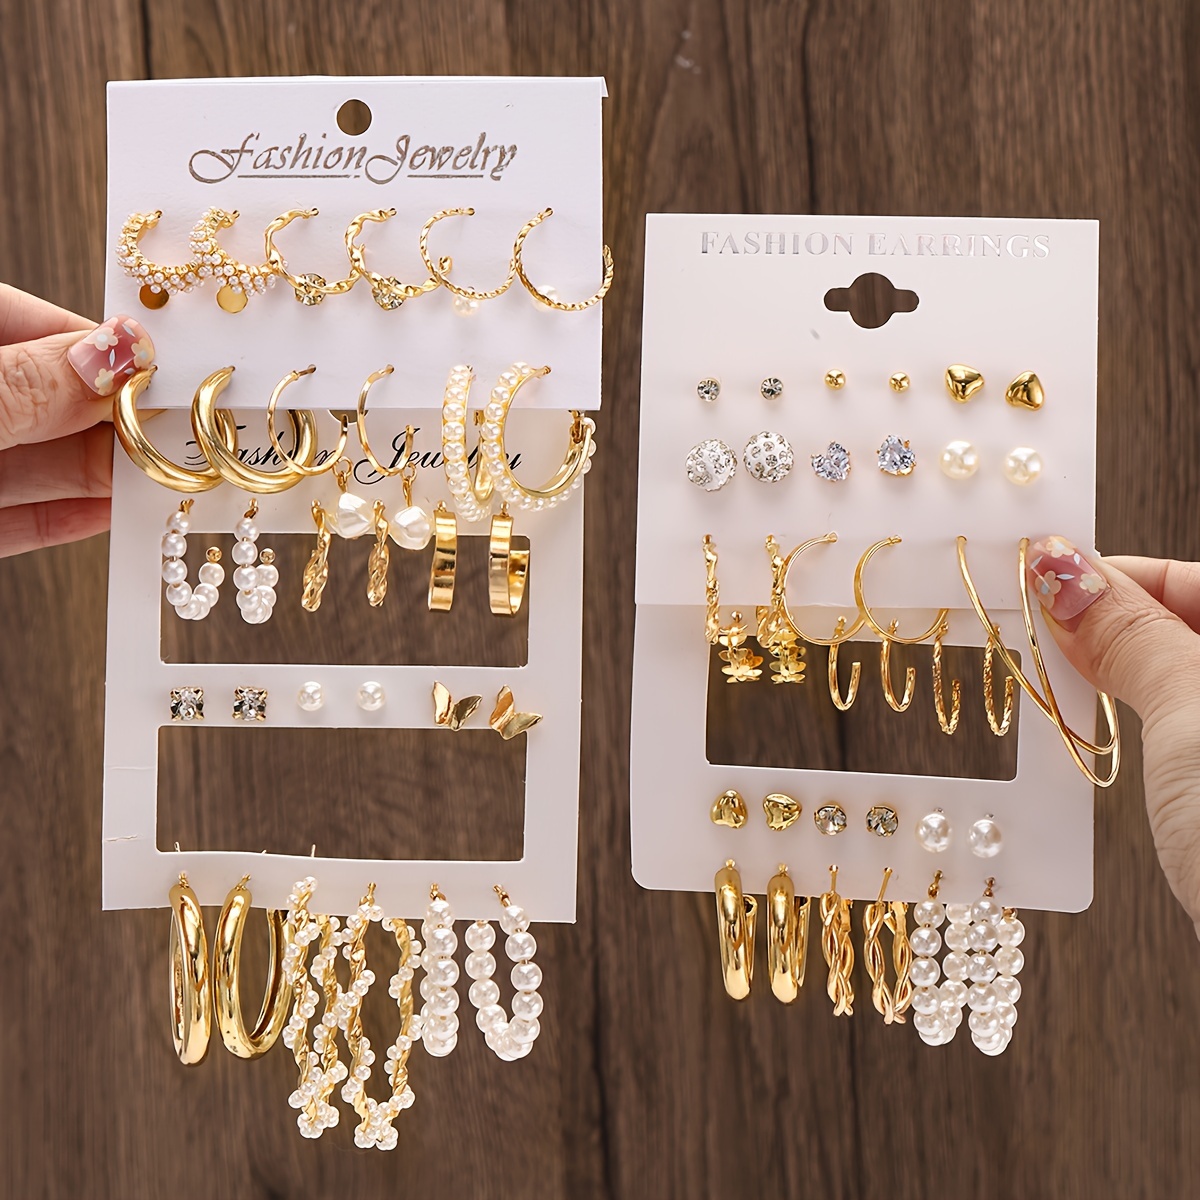 

36 Pairs Set Of Tiny Hoop Earrings, Zinc Alloy Jewelry Faux Pearl Inlaid Studs, Elegant Simple Style For Women Delicate Gift